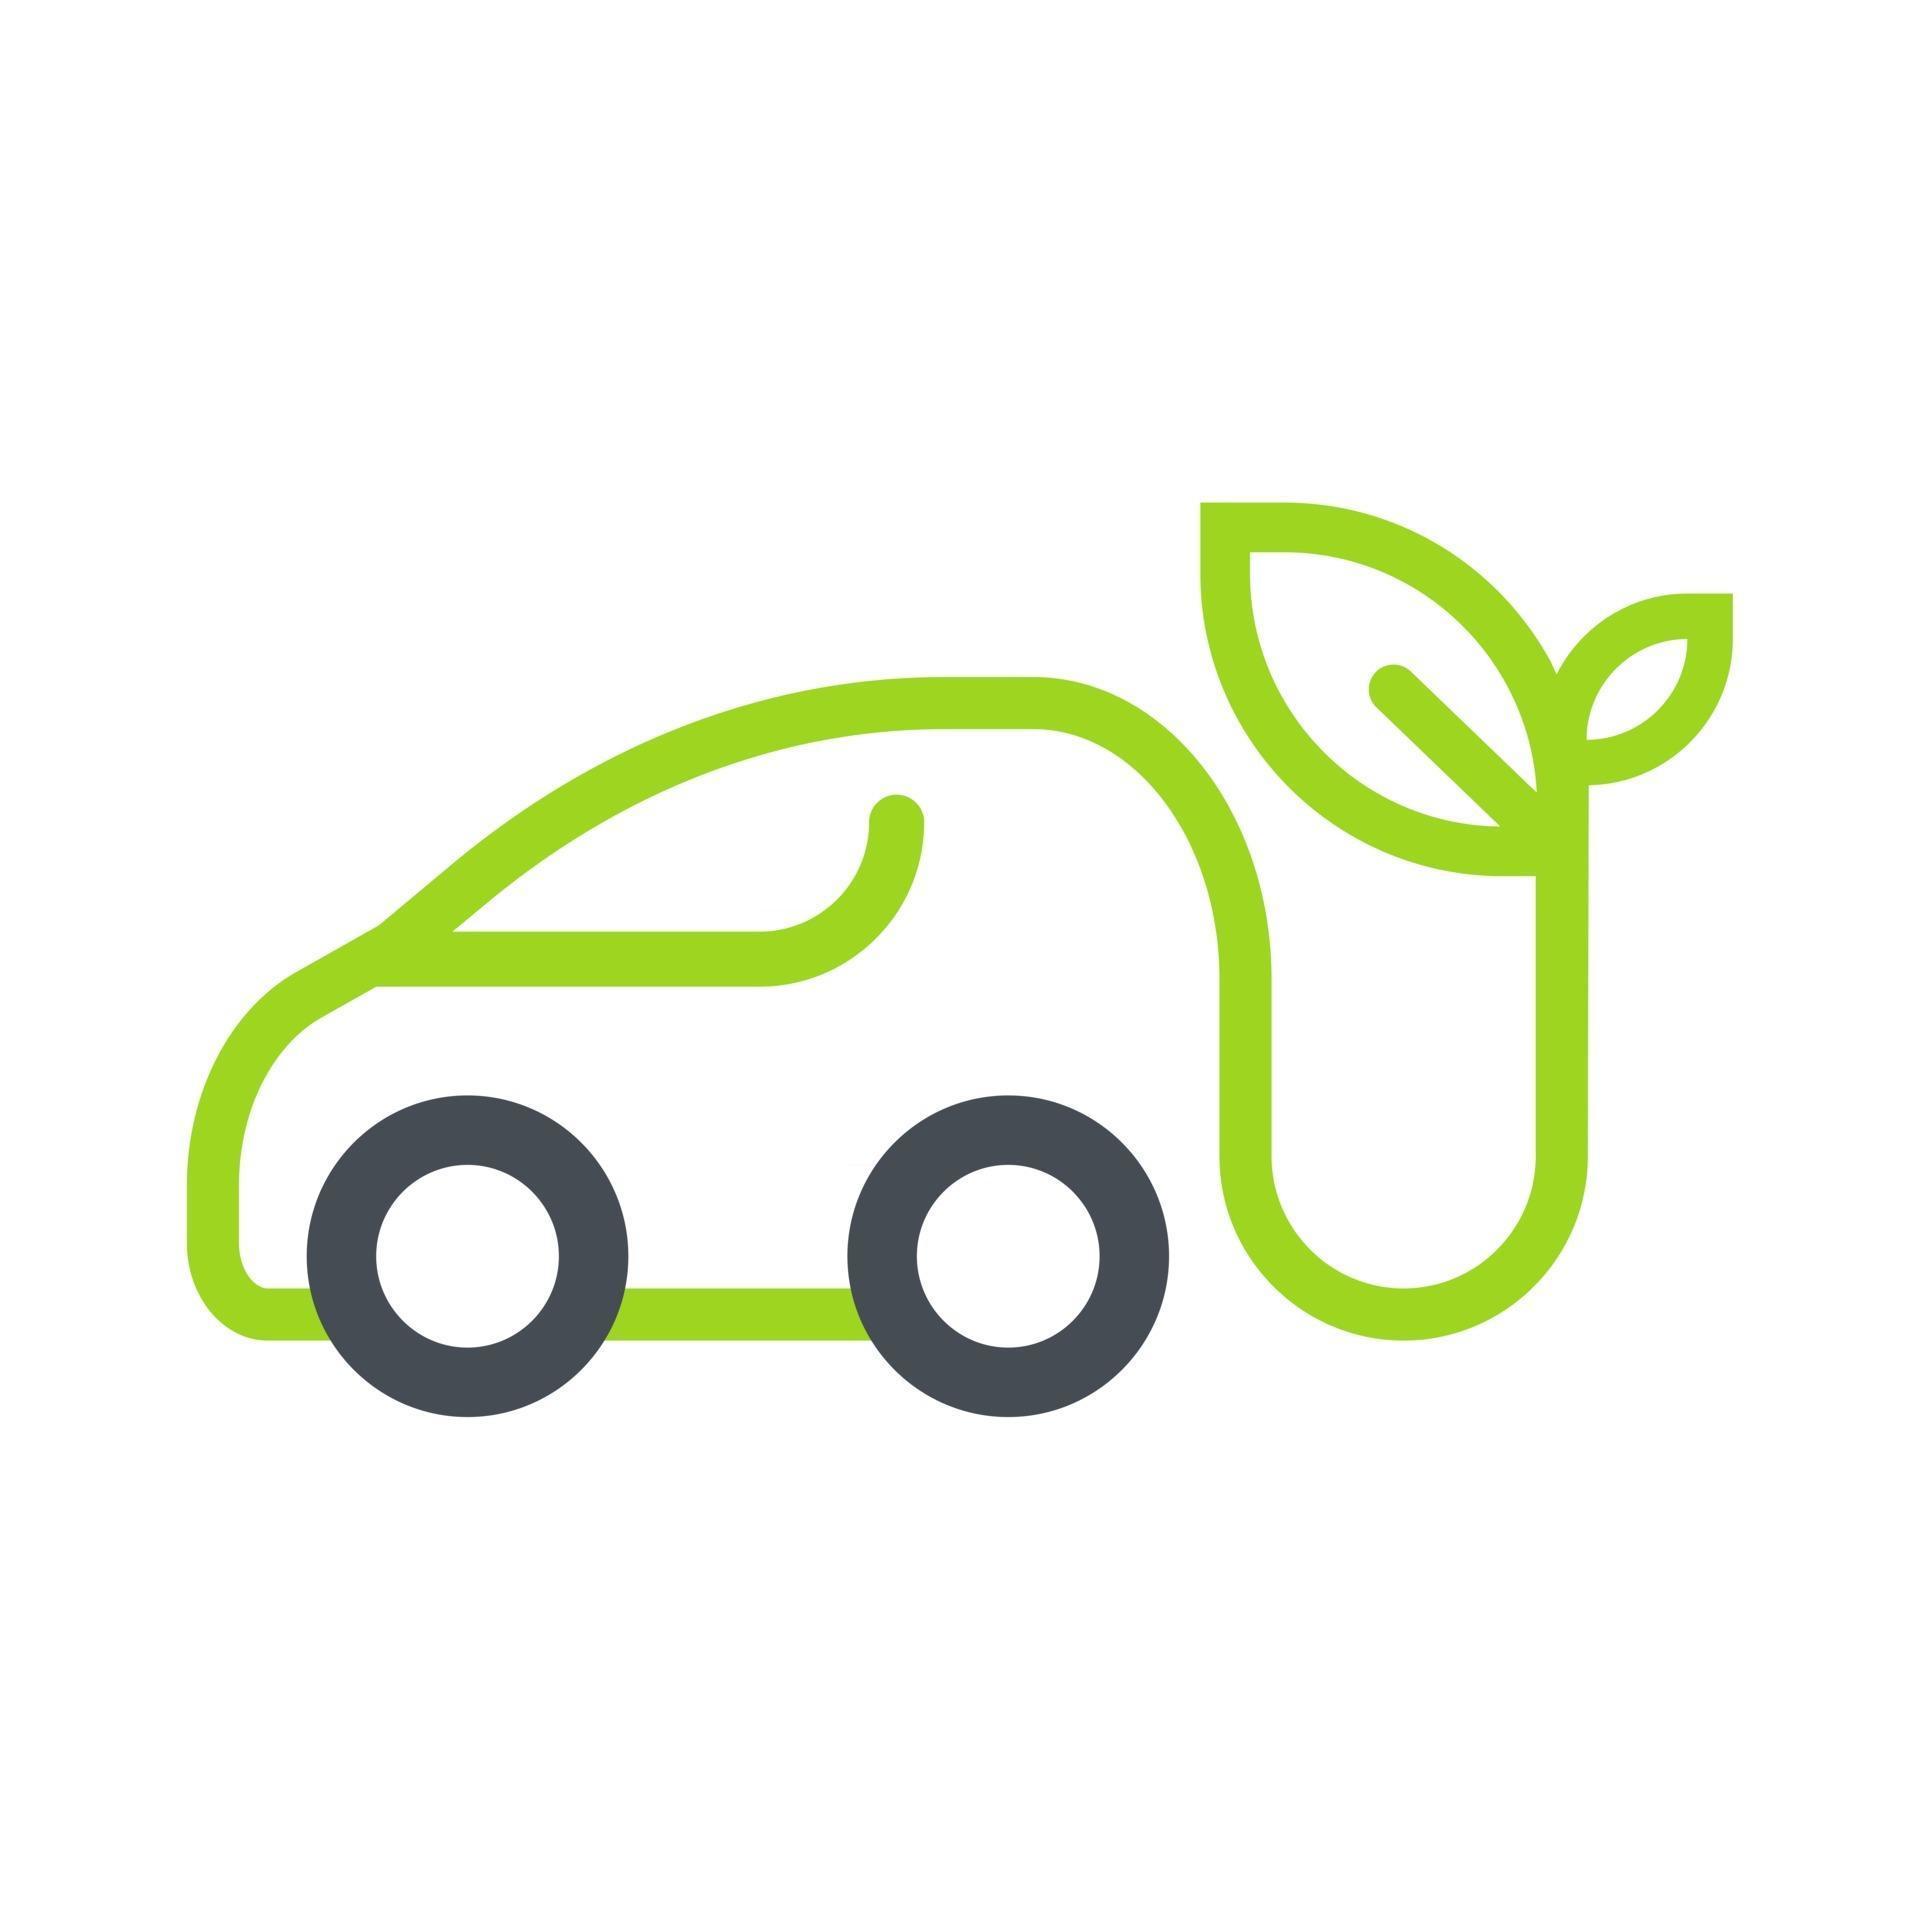 Electric car icon. A platform for charging electric cars Concept of